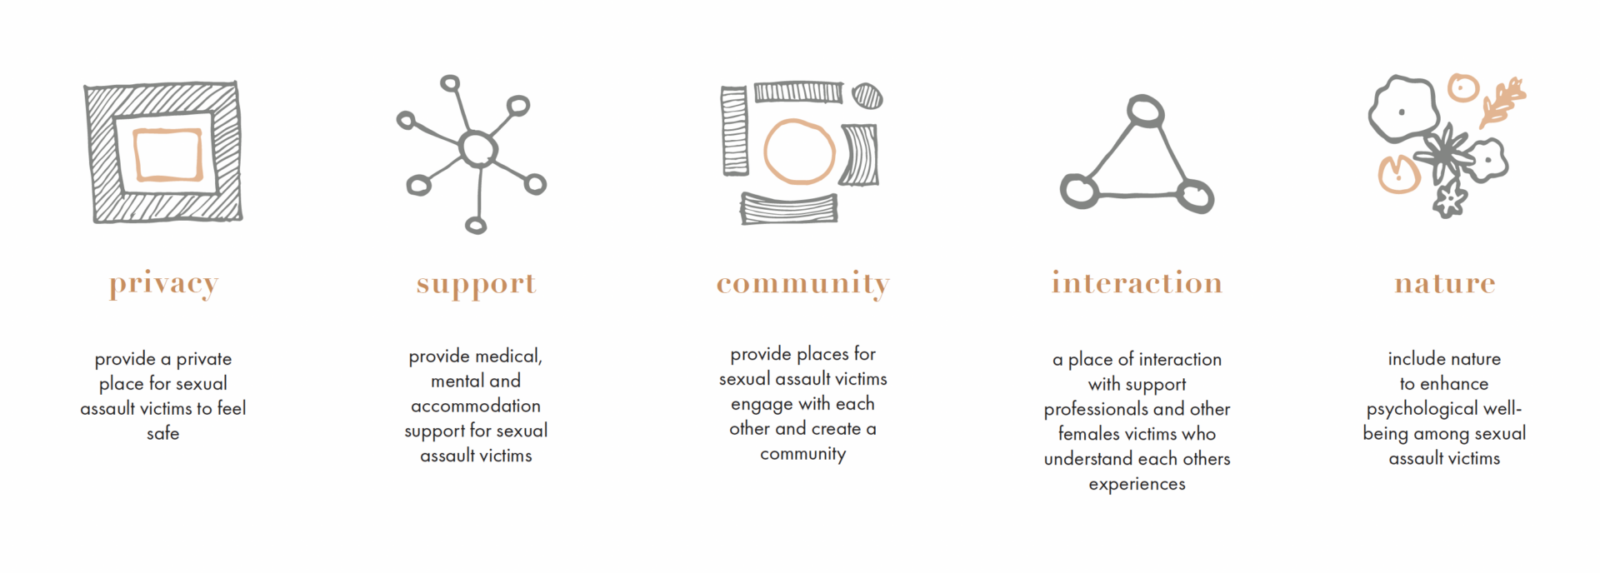 Design Principles: privacy, support, community, interaction and nature. 